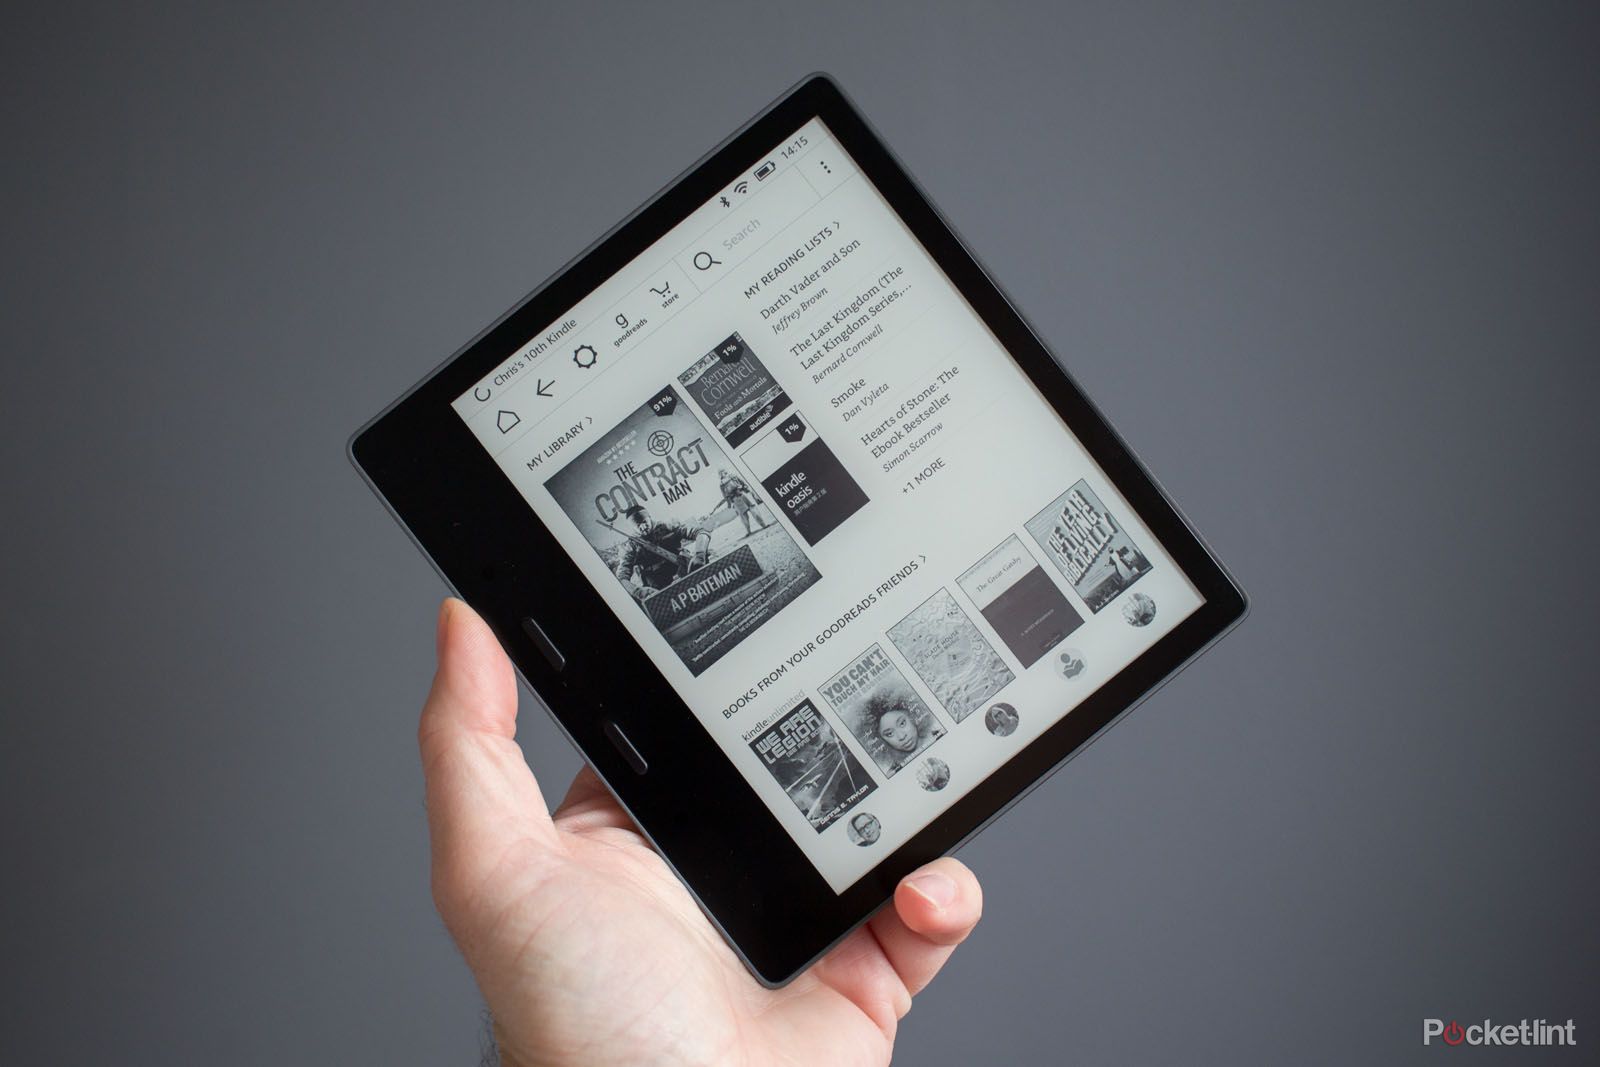 Amazon Kindle A brief history from the original Kindle onwards image 1